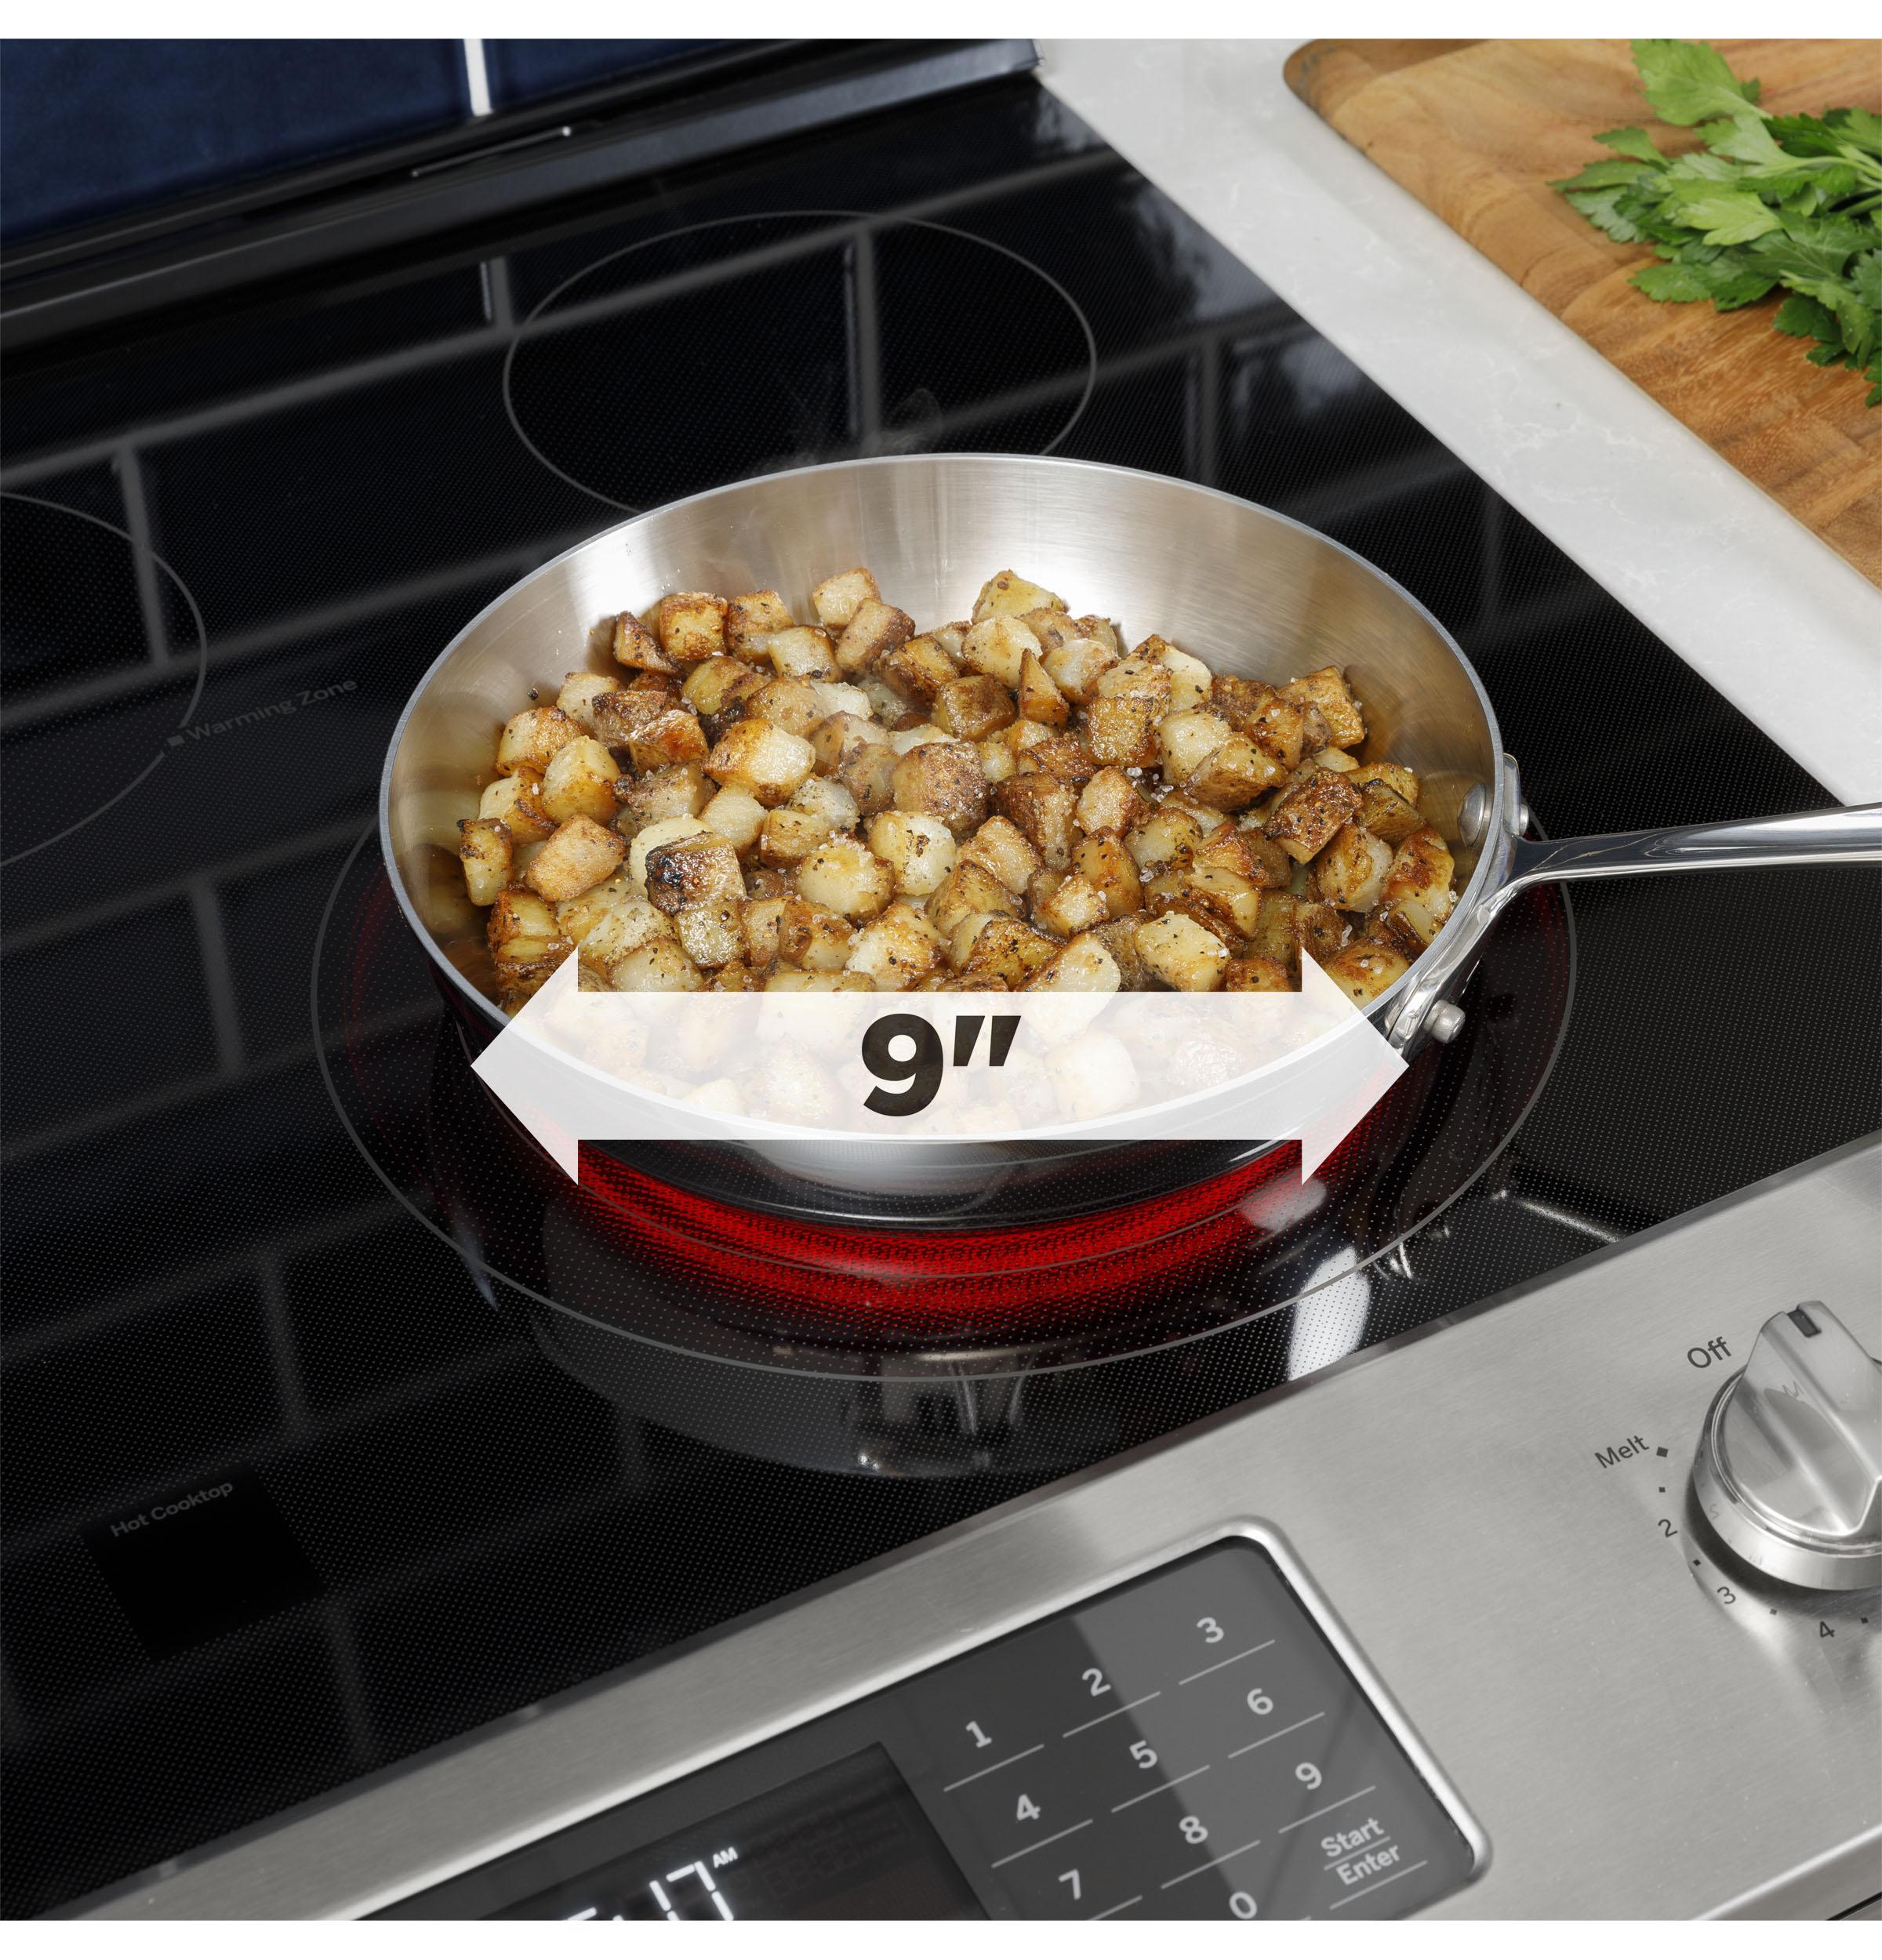 GE® 30" Free-Standing Electric Convection Range